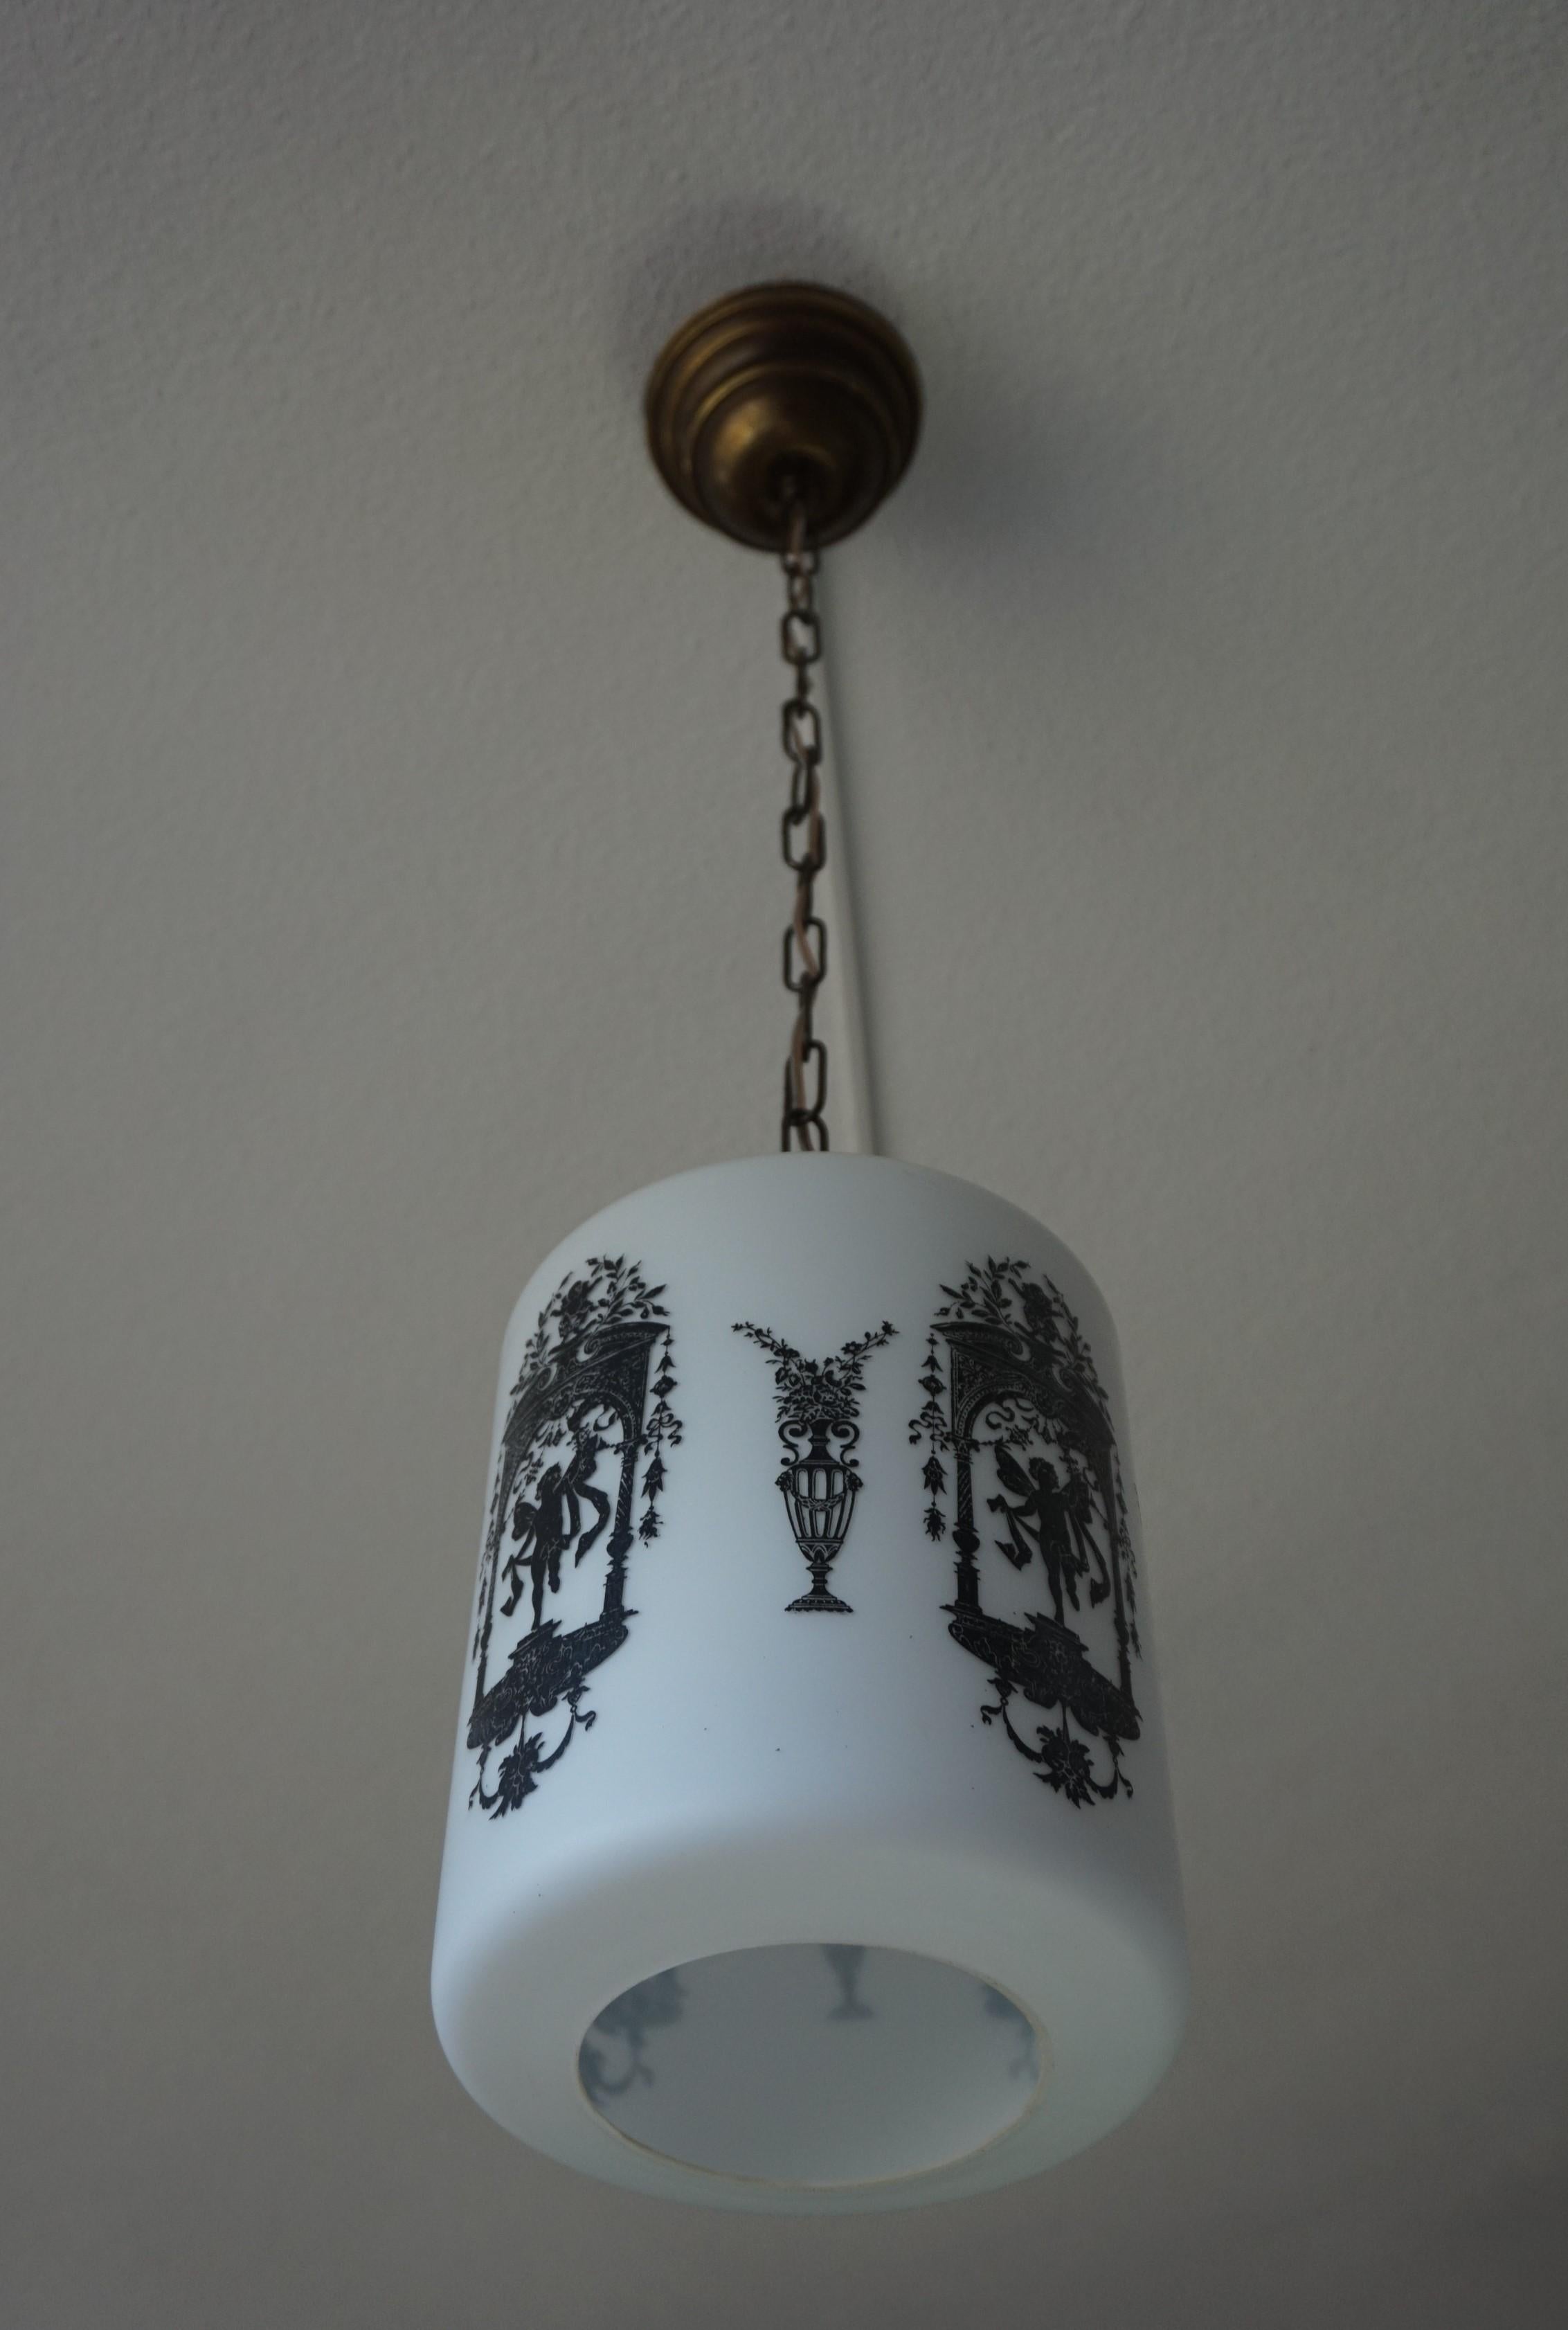 European Early to Mid-20th Century Snowy White Glass Pendant with Black Renaissance Decor For Sale